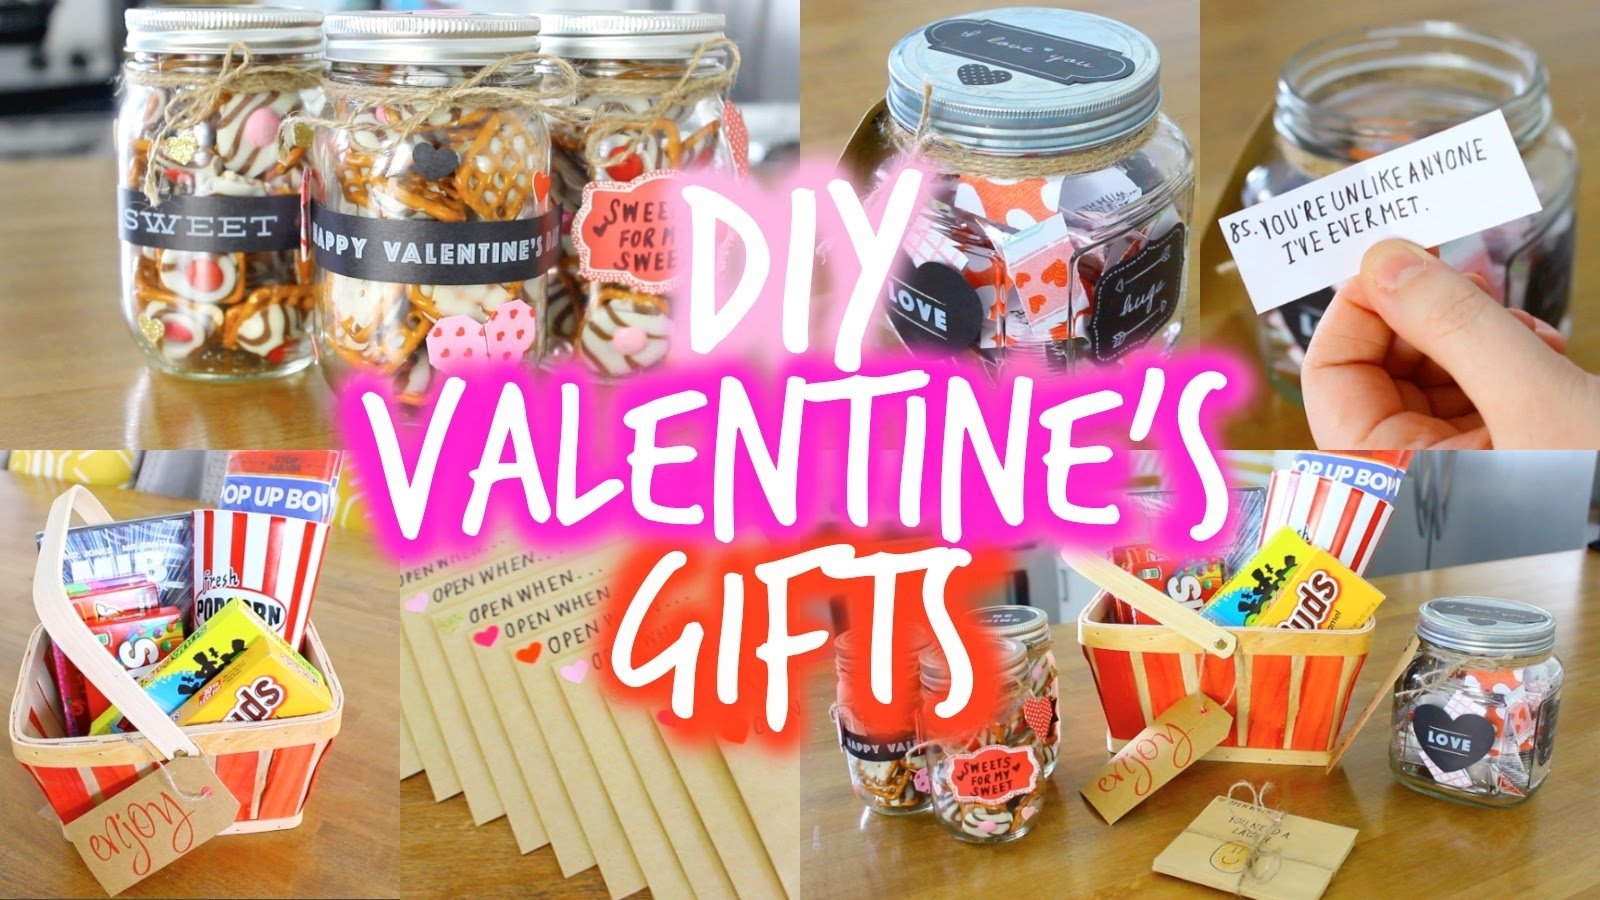 10 Unique Valentine Gift Ideas For Him Homemade easy diy valentines day gift ideas for your boyfriend youtube 16 2022